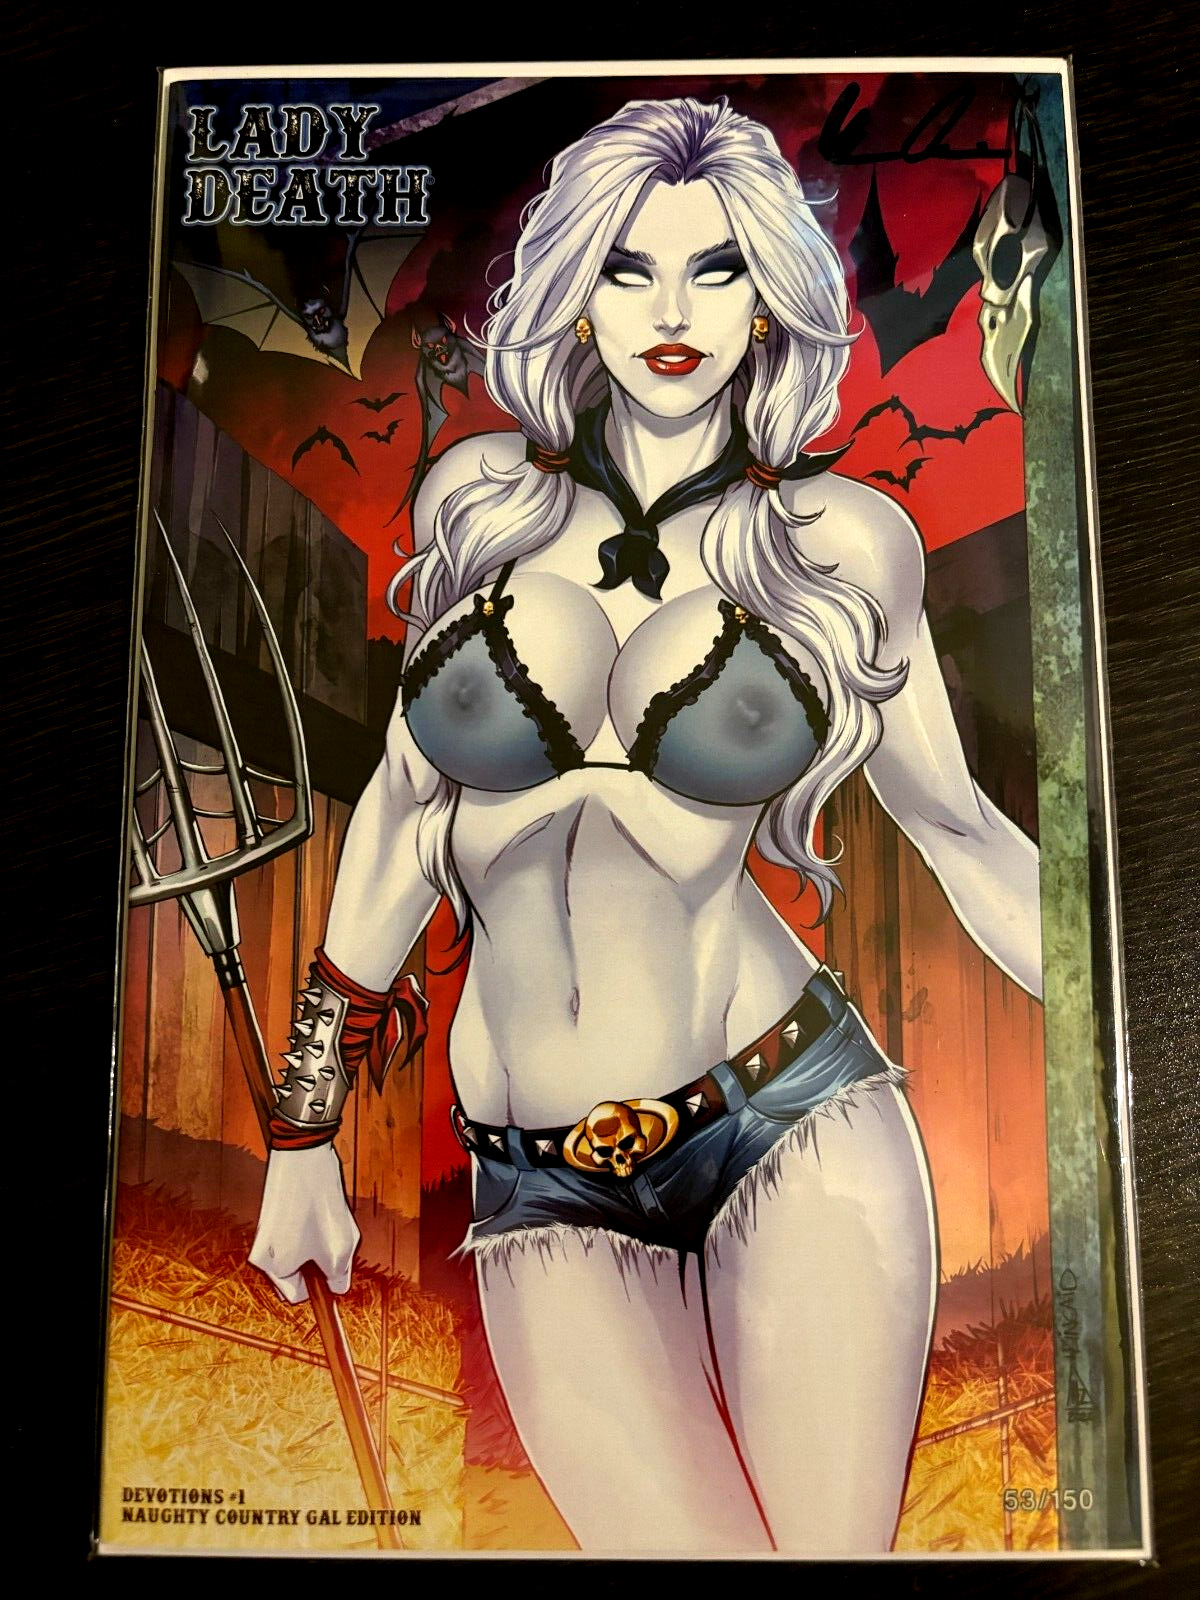 LADY DEATH #1 DEVOTIONS NAUGHTY EDITION NUMBERED SIGNED COA LTD 150 NM+